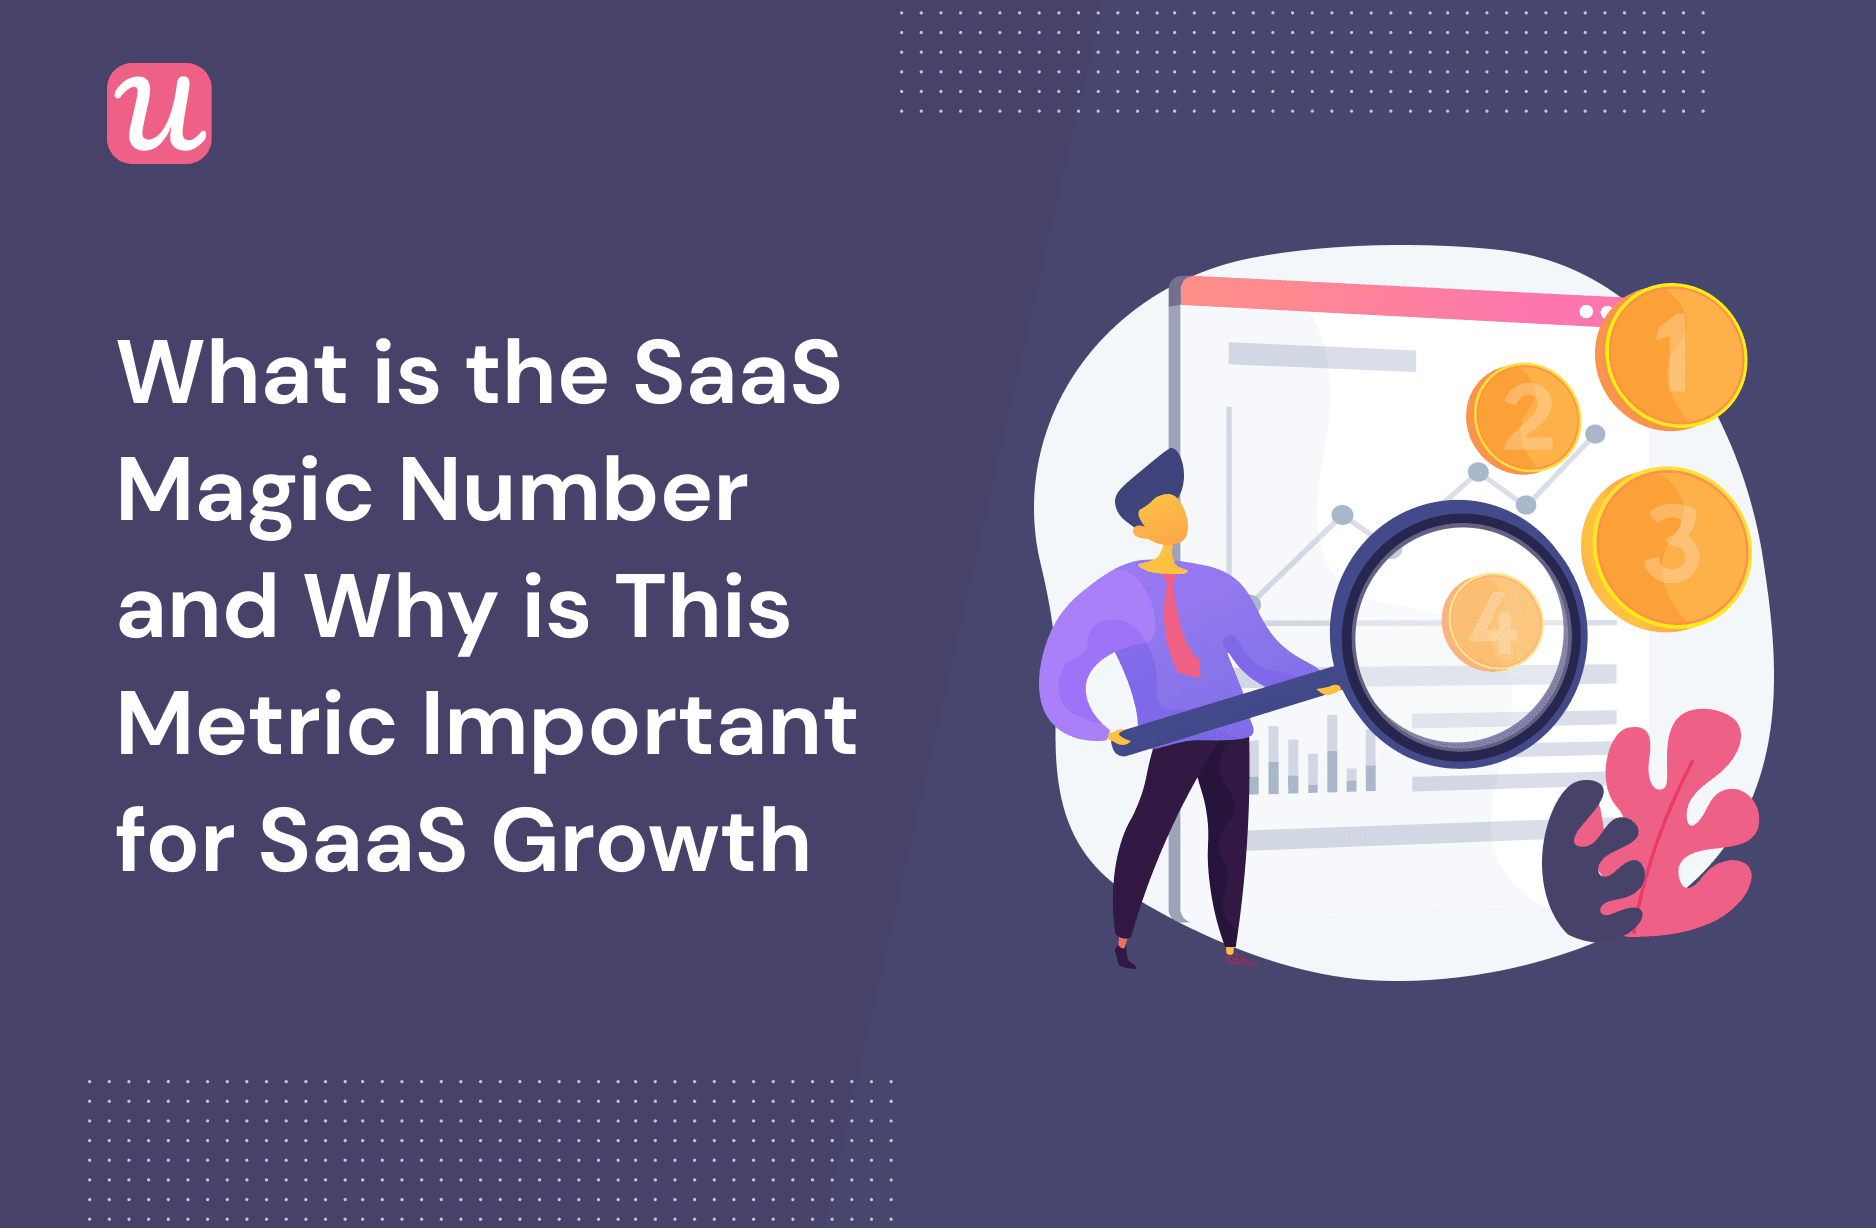 What is the SaaS Magic Number and Why is This Metric Important for SaaS Growth?